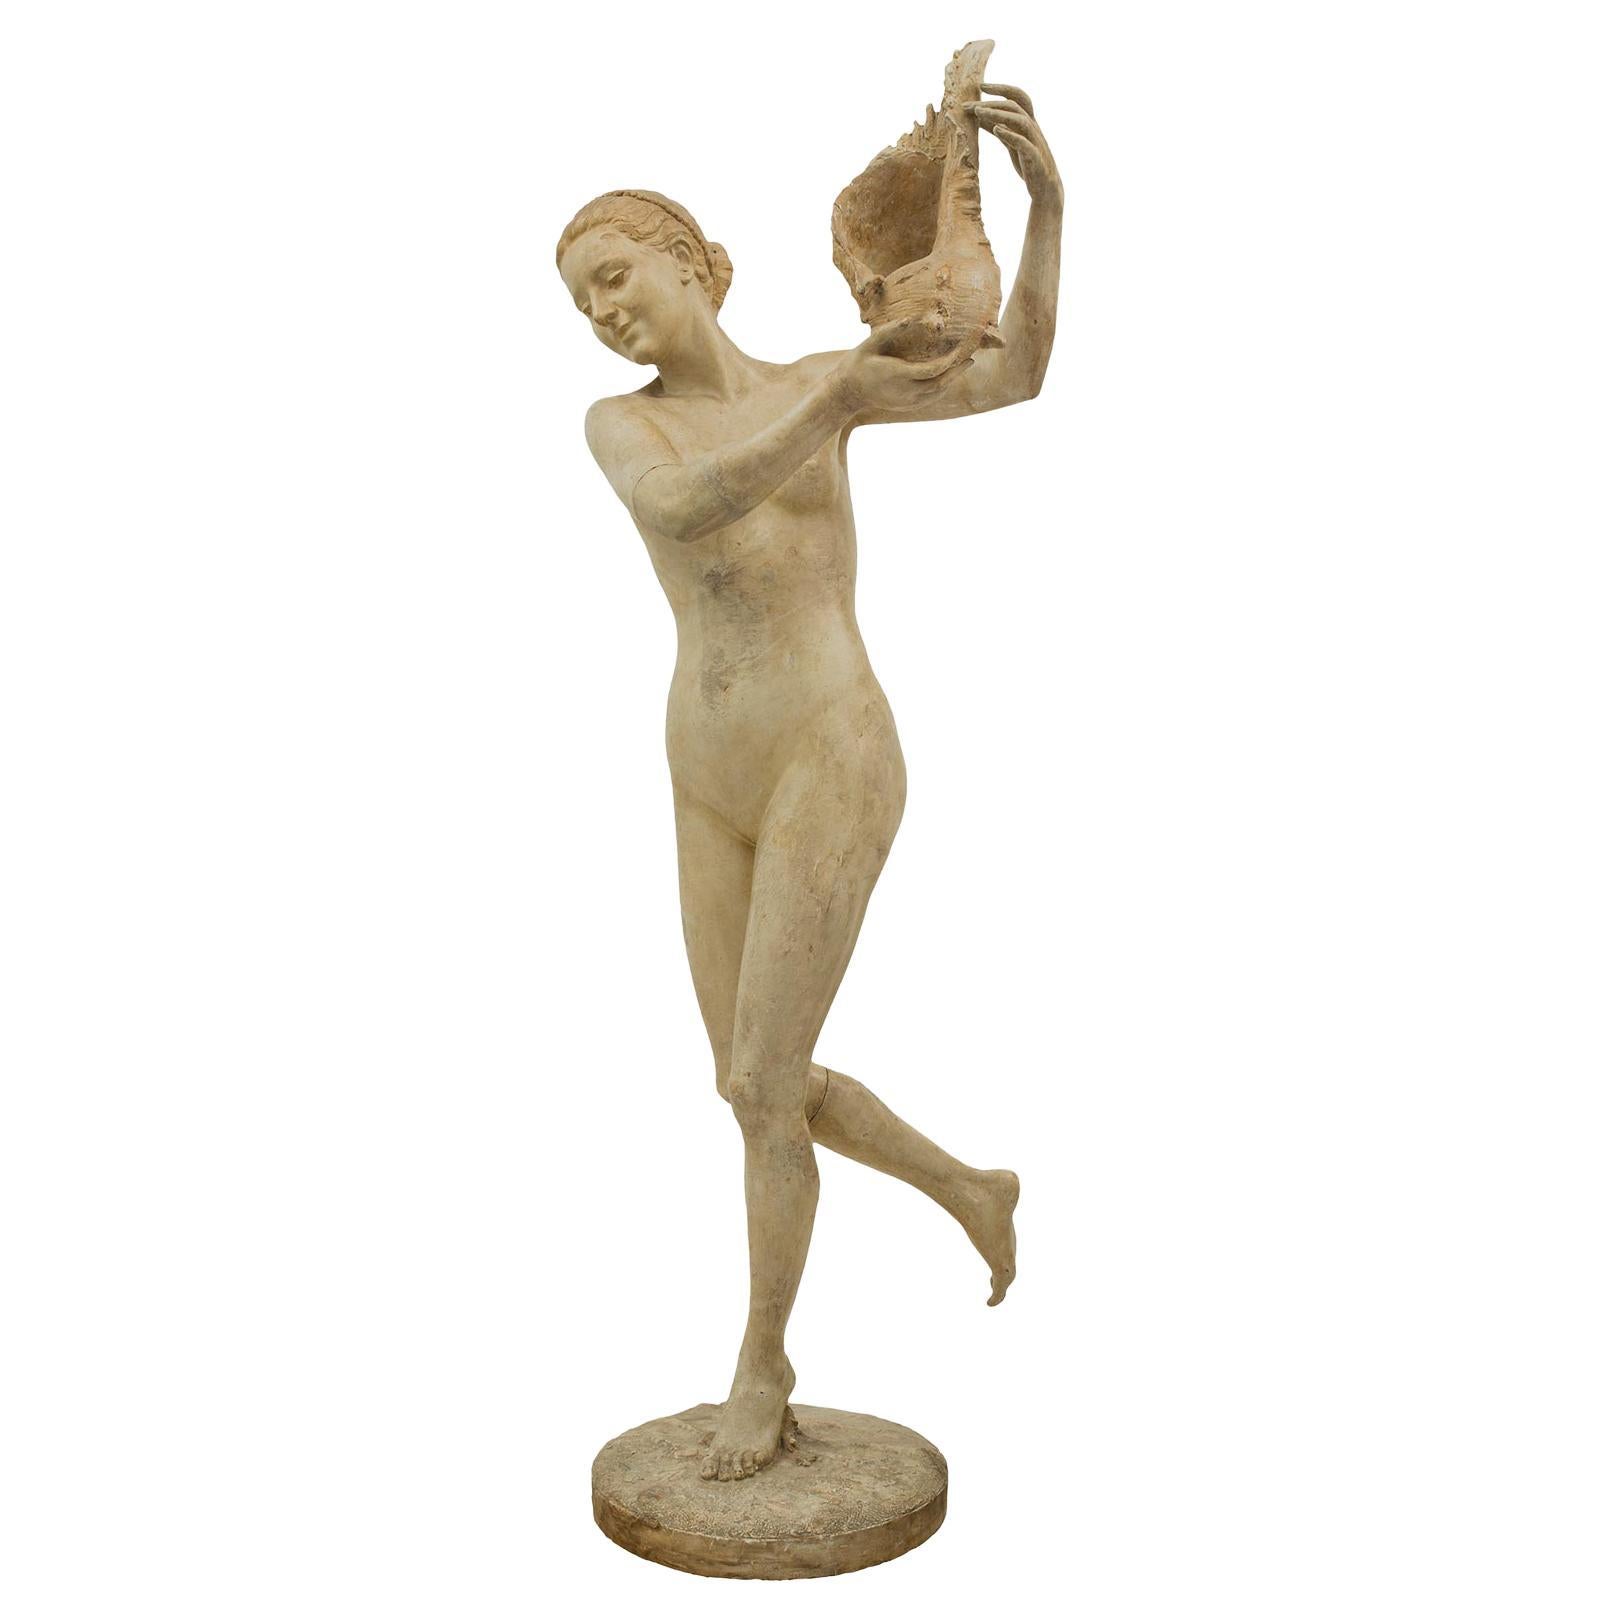 Italian 19th Century Statue of a Lady Holding a Seashell, Signed Gabrieli